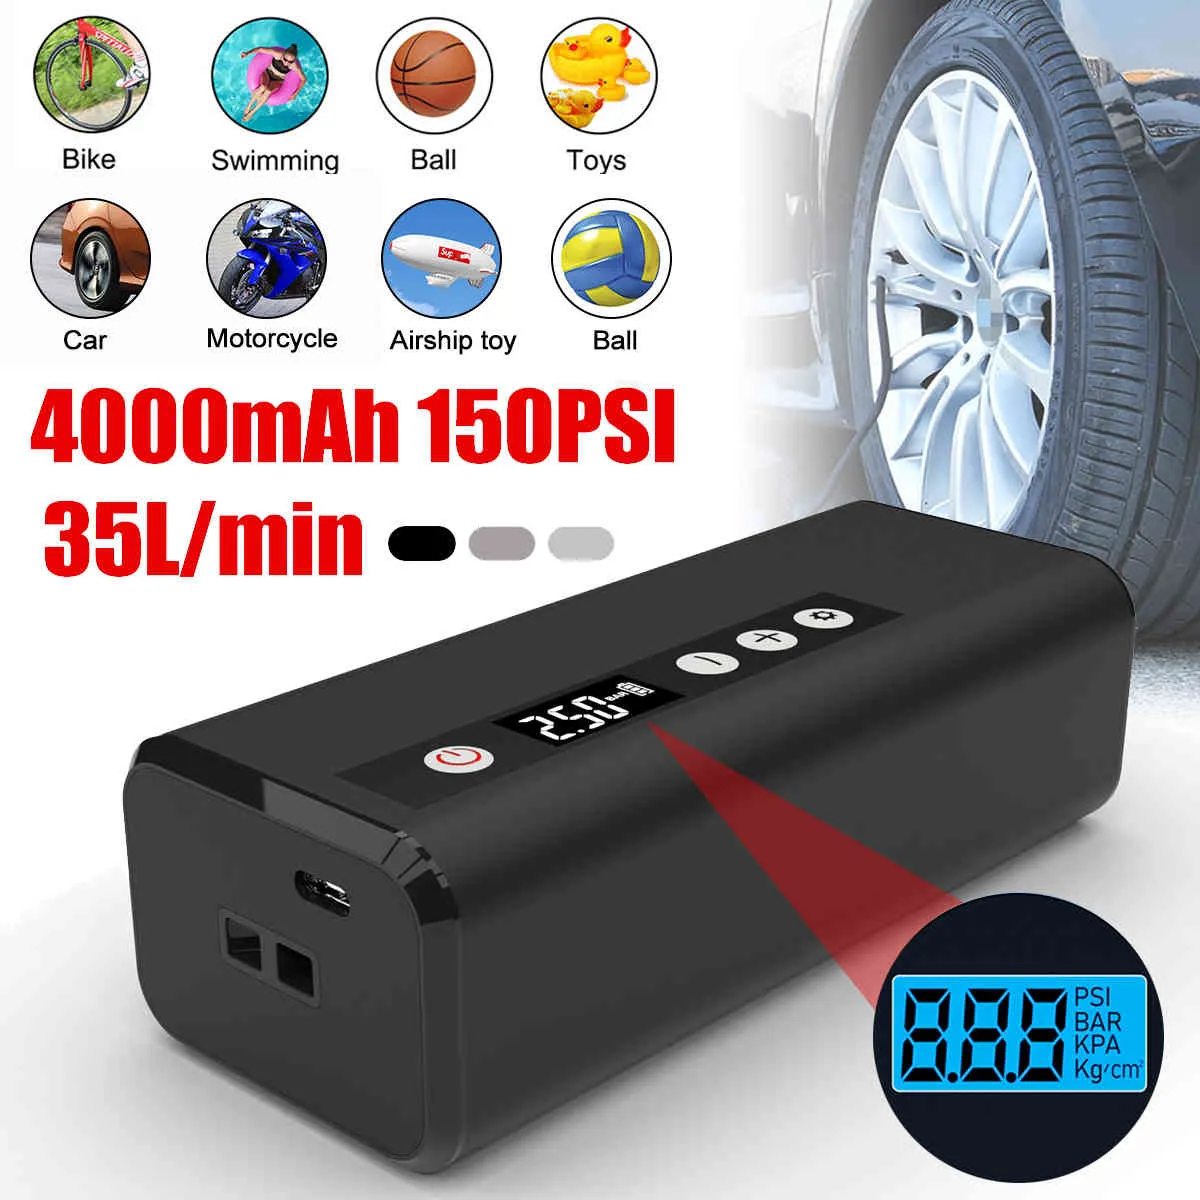 4000mAh 150PSI 35L/min Rechargeable Compressor Electric Tyre Tire Inflator Mini Auto Air Inflatable Pump Car Bicycle Boat